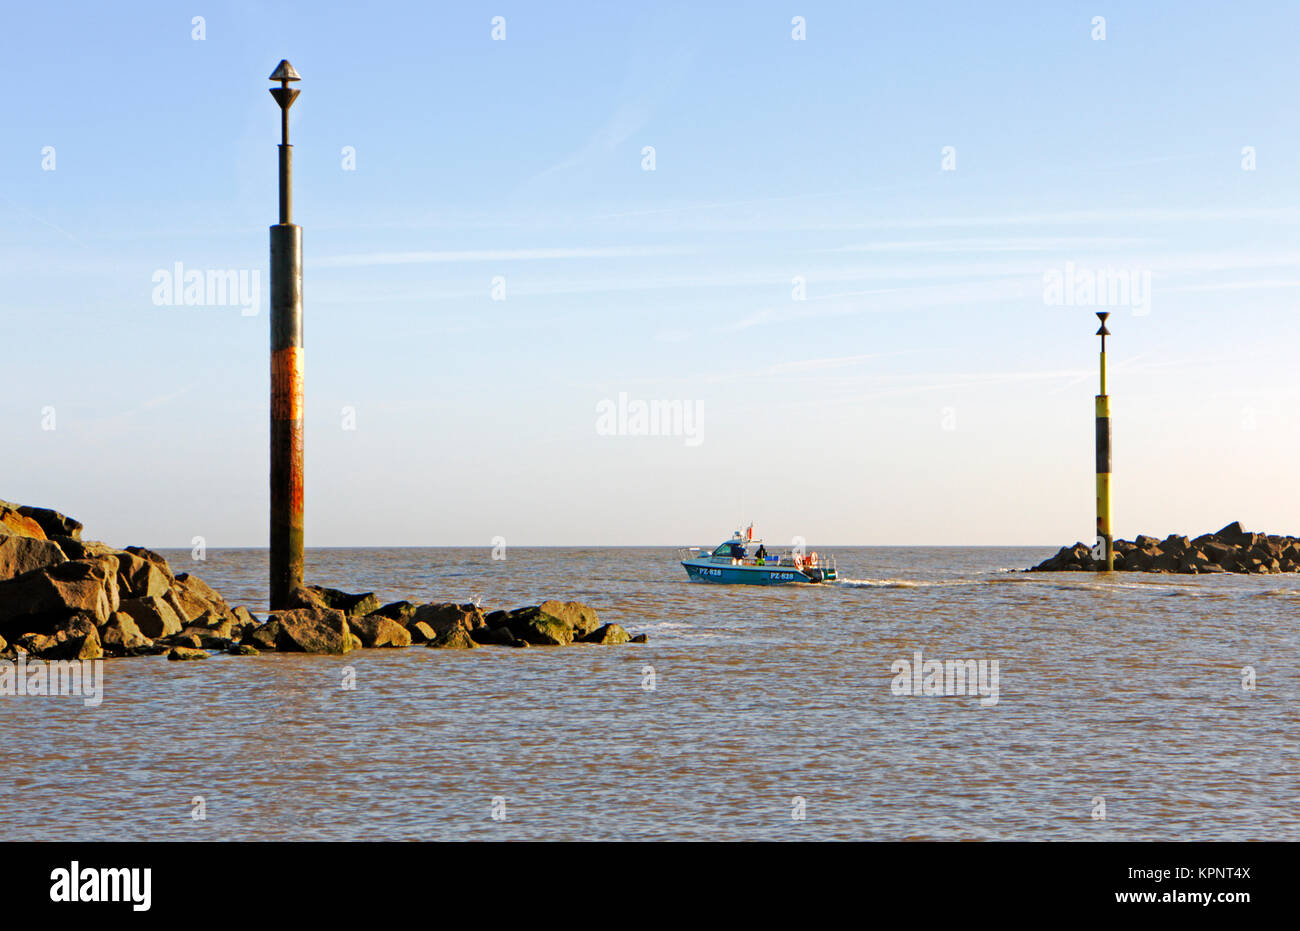 A view of an inshore fishing boat heading out to sea between artificial reefs at Sea Palling, Norfolk, England, United Kingdom. Stock Photo